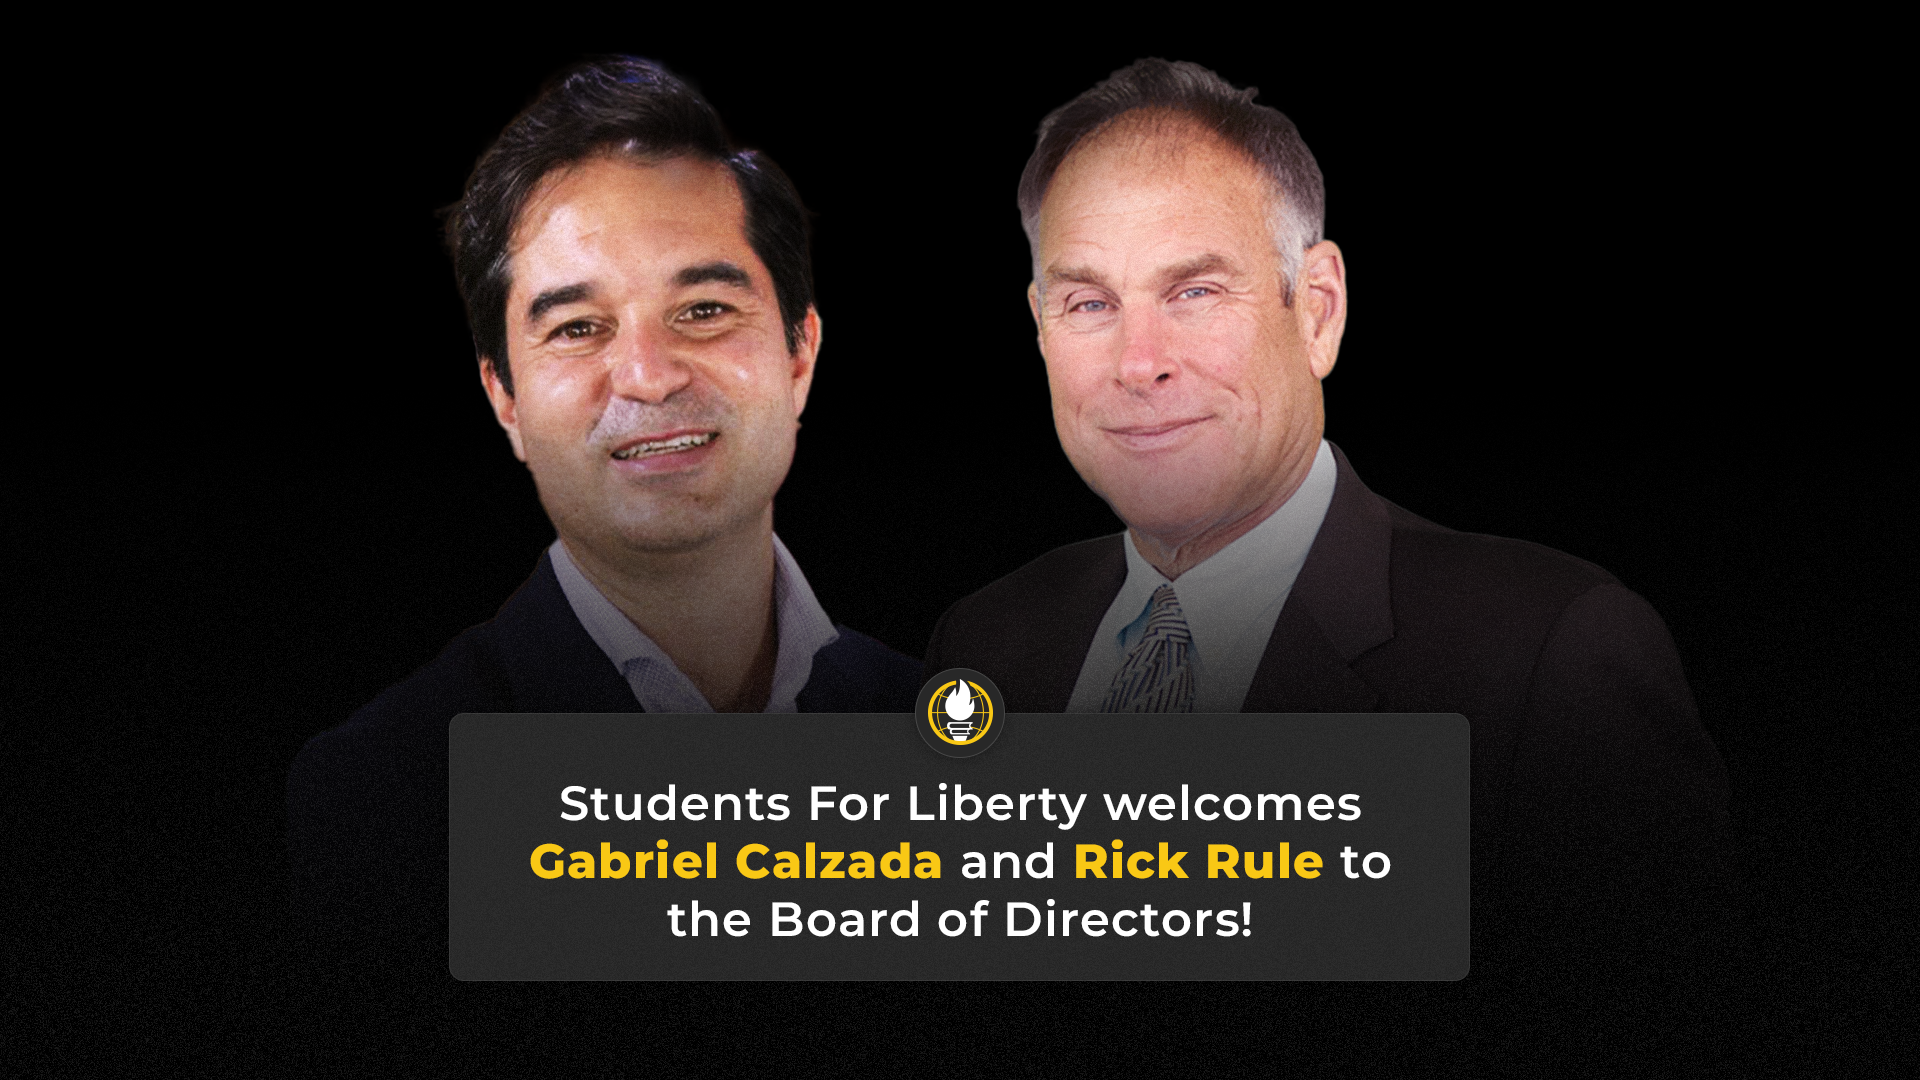 Students For Liberty is pleased to announce the appointment of Rick Rule and Gabriel Calzada to its Board of Directors